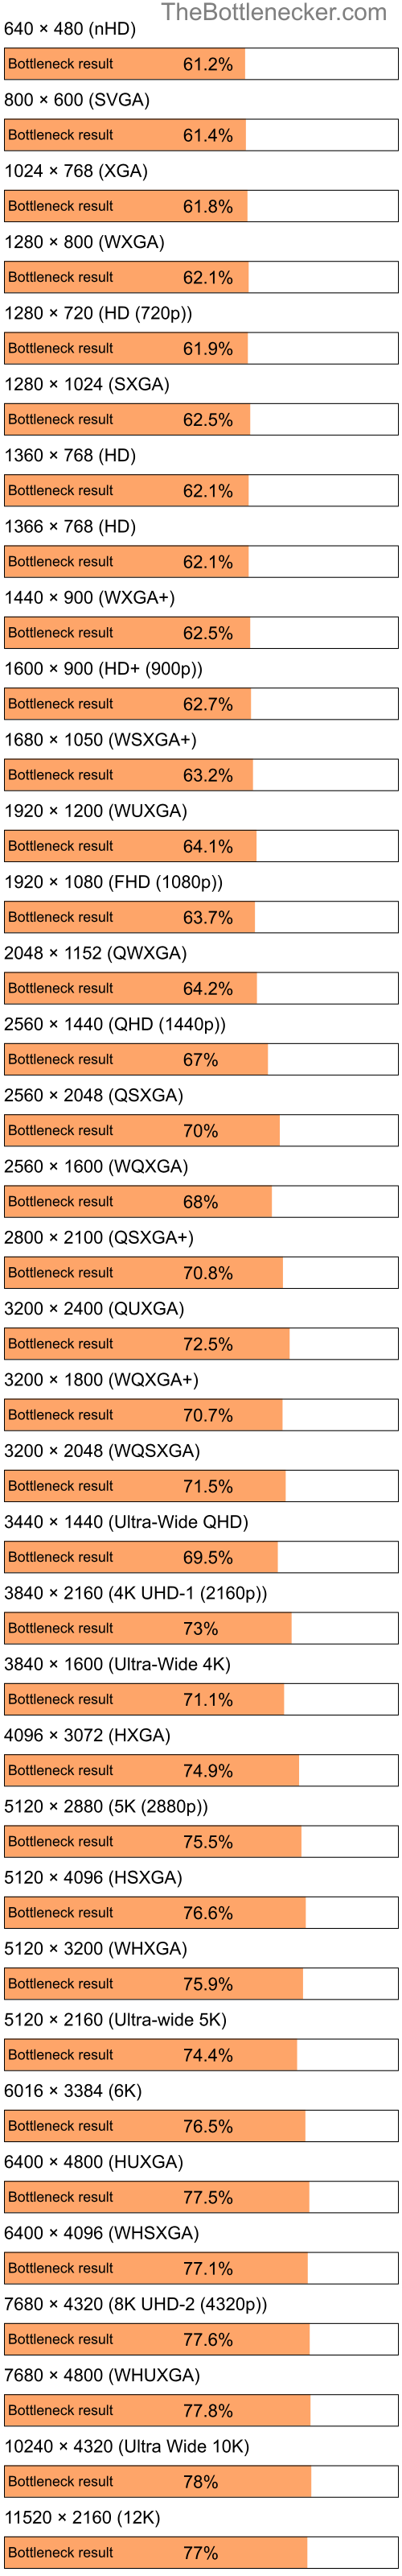 Bottleneck results by resolution for Intel Pentium 4 and NVIDIA GeForce 6610 XL in General Tasks